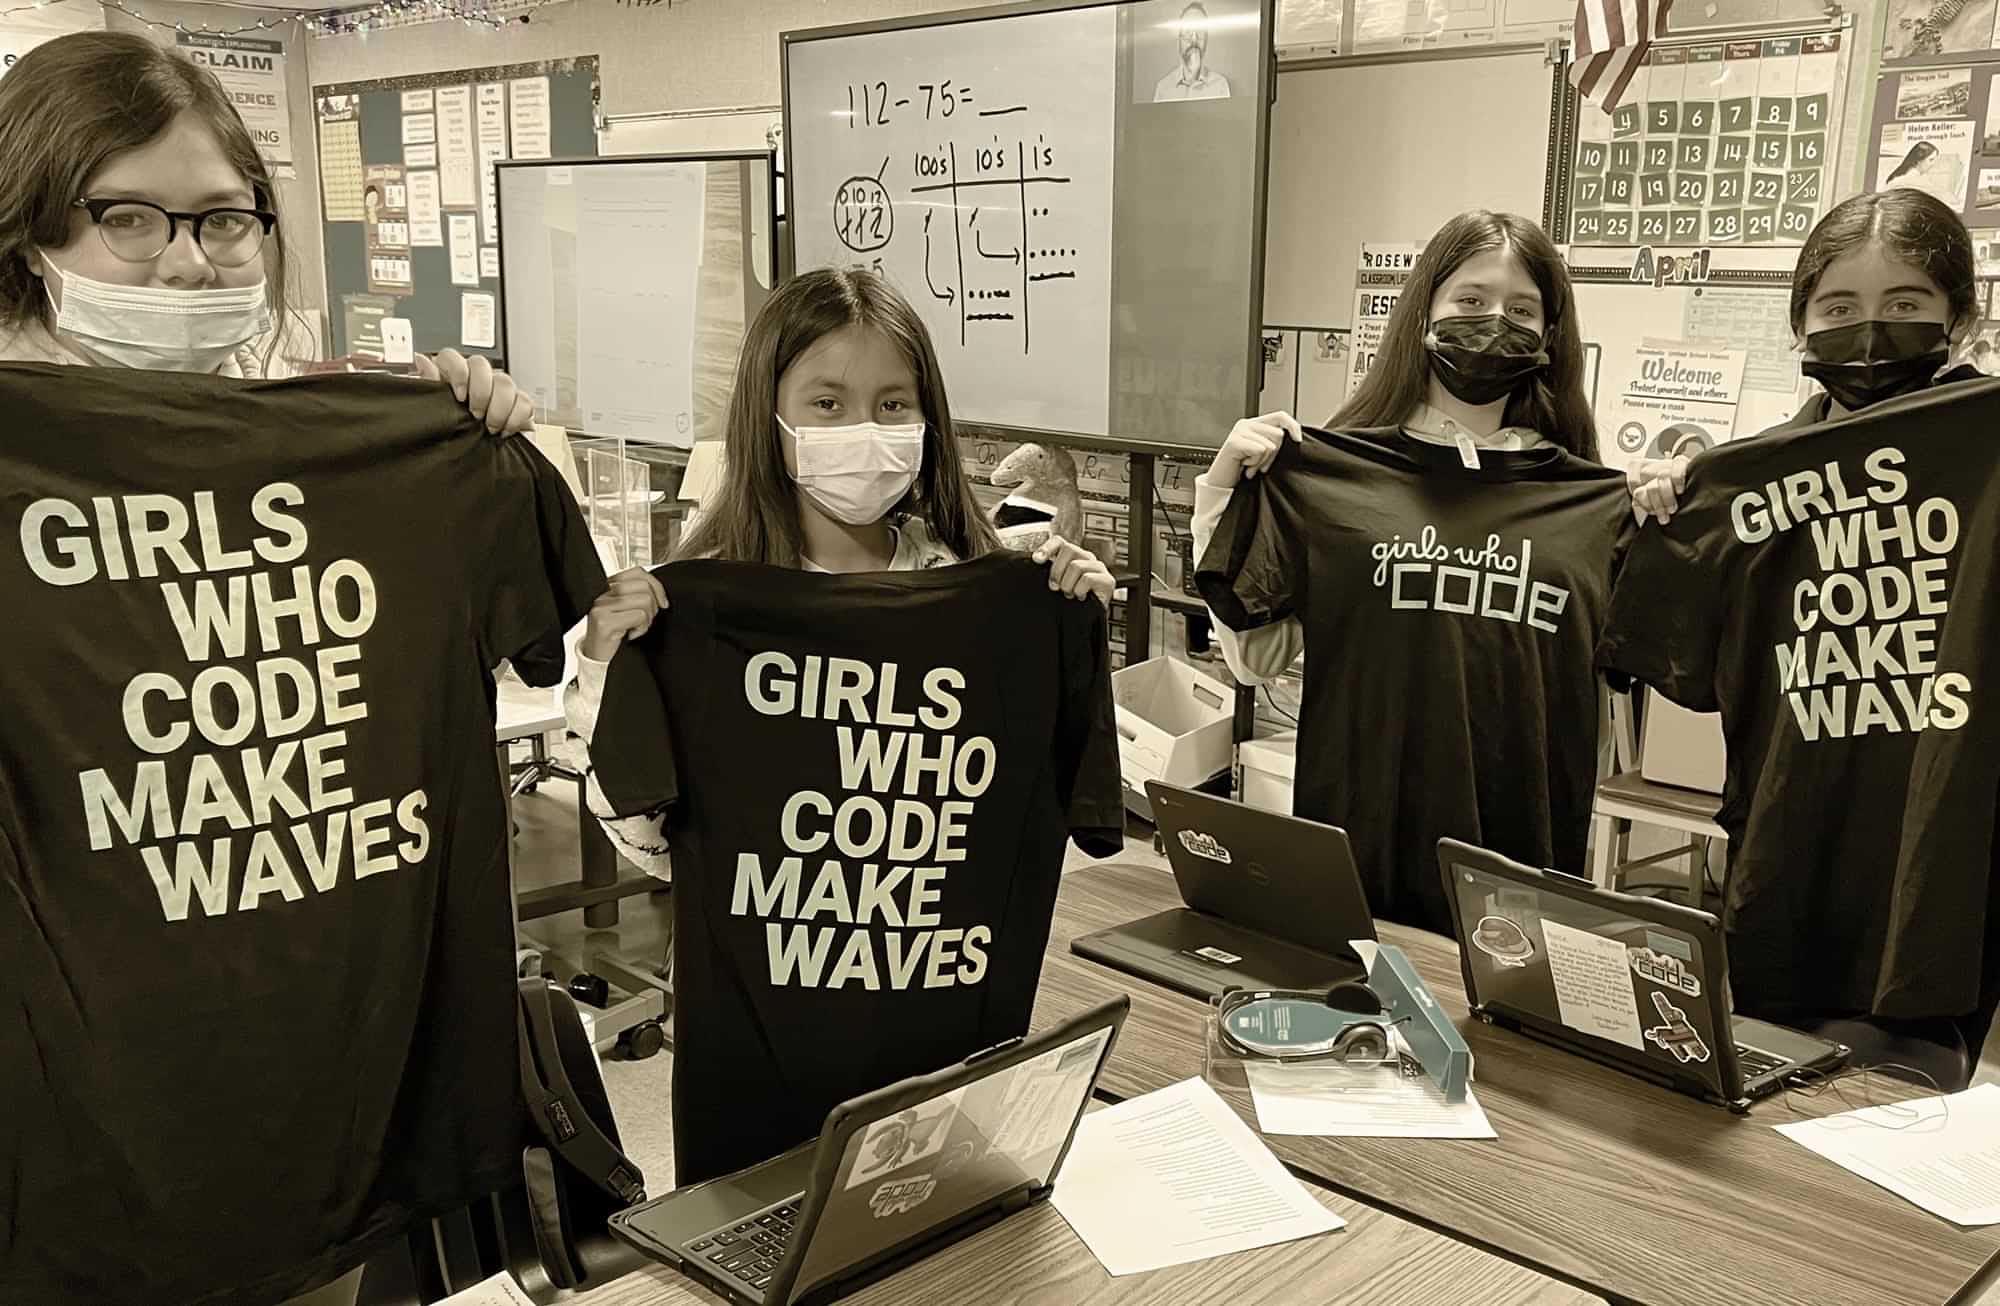 masked middle school aged female students hold shirts that read "Girls who code make waves"